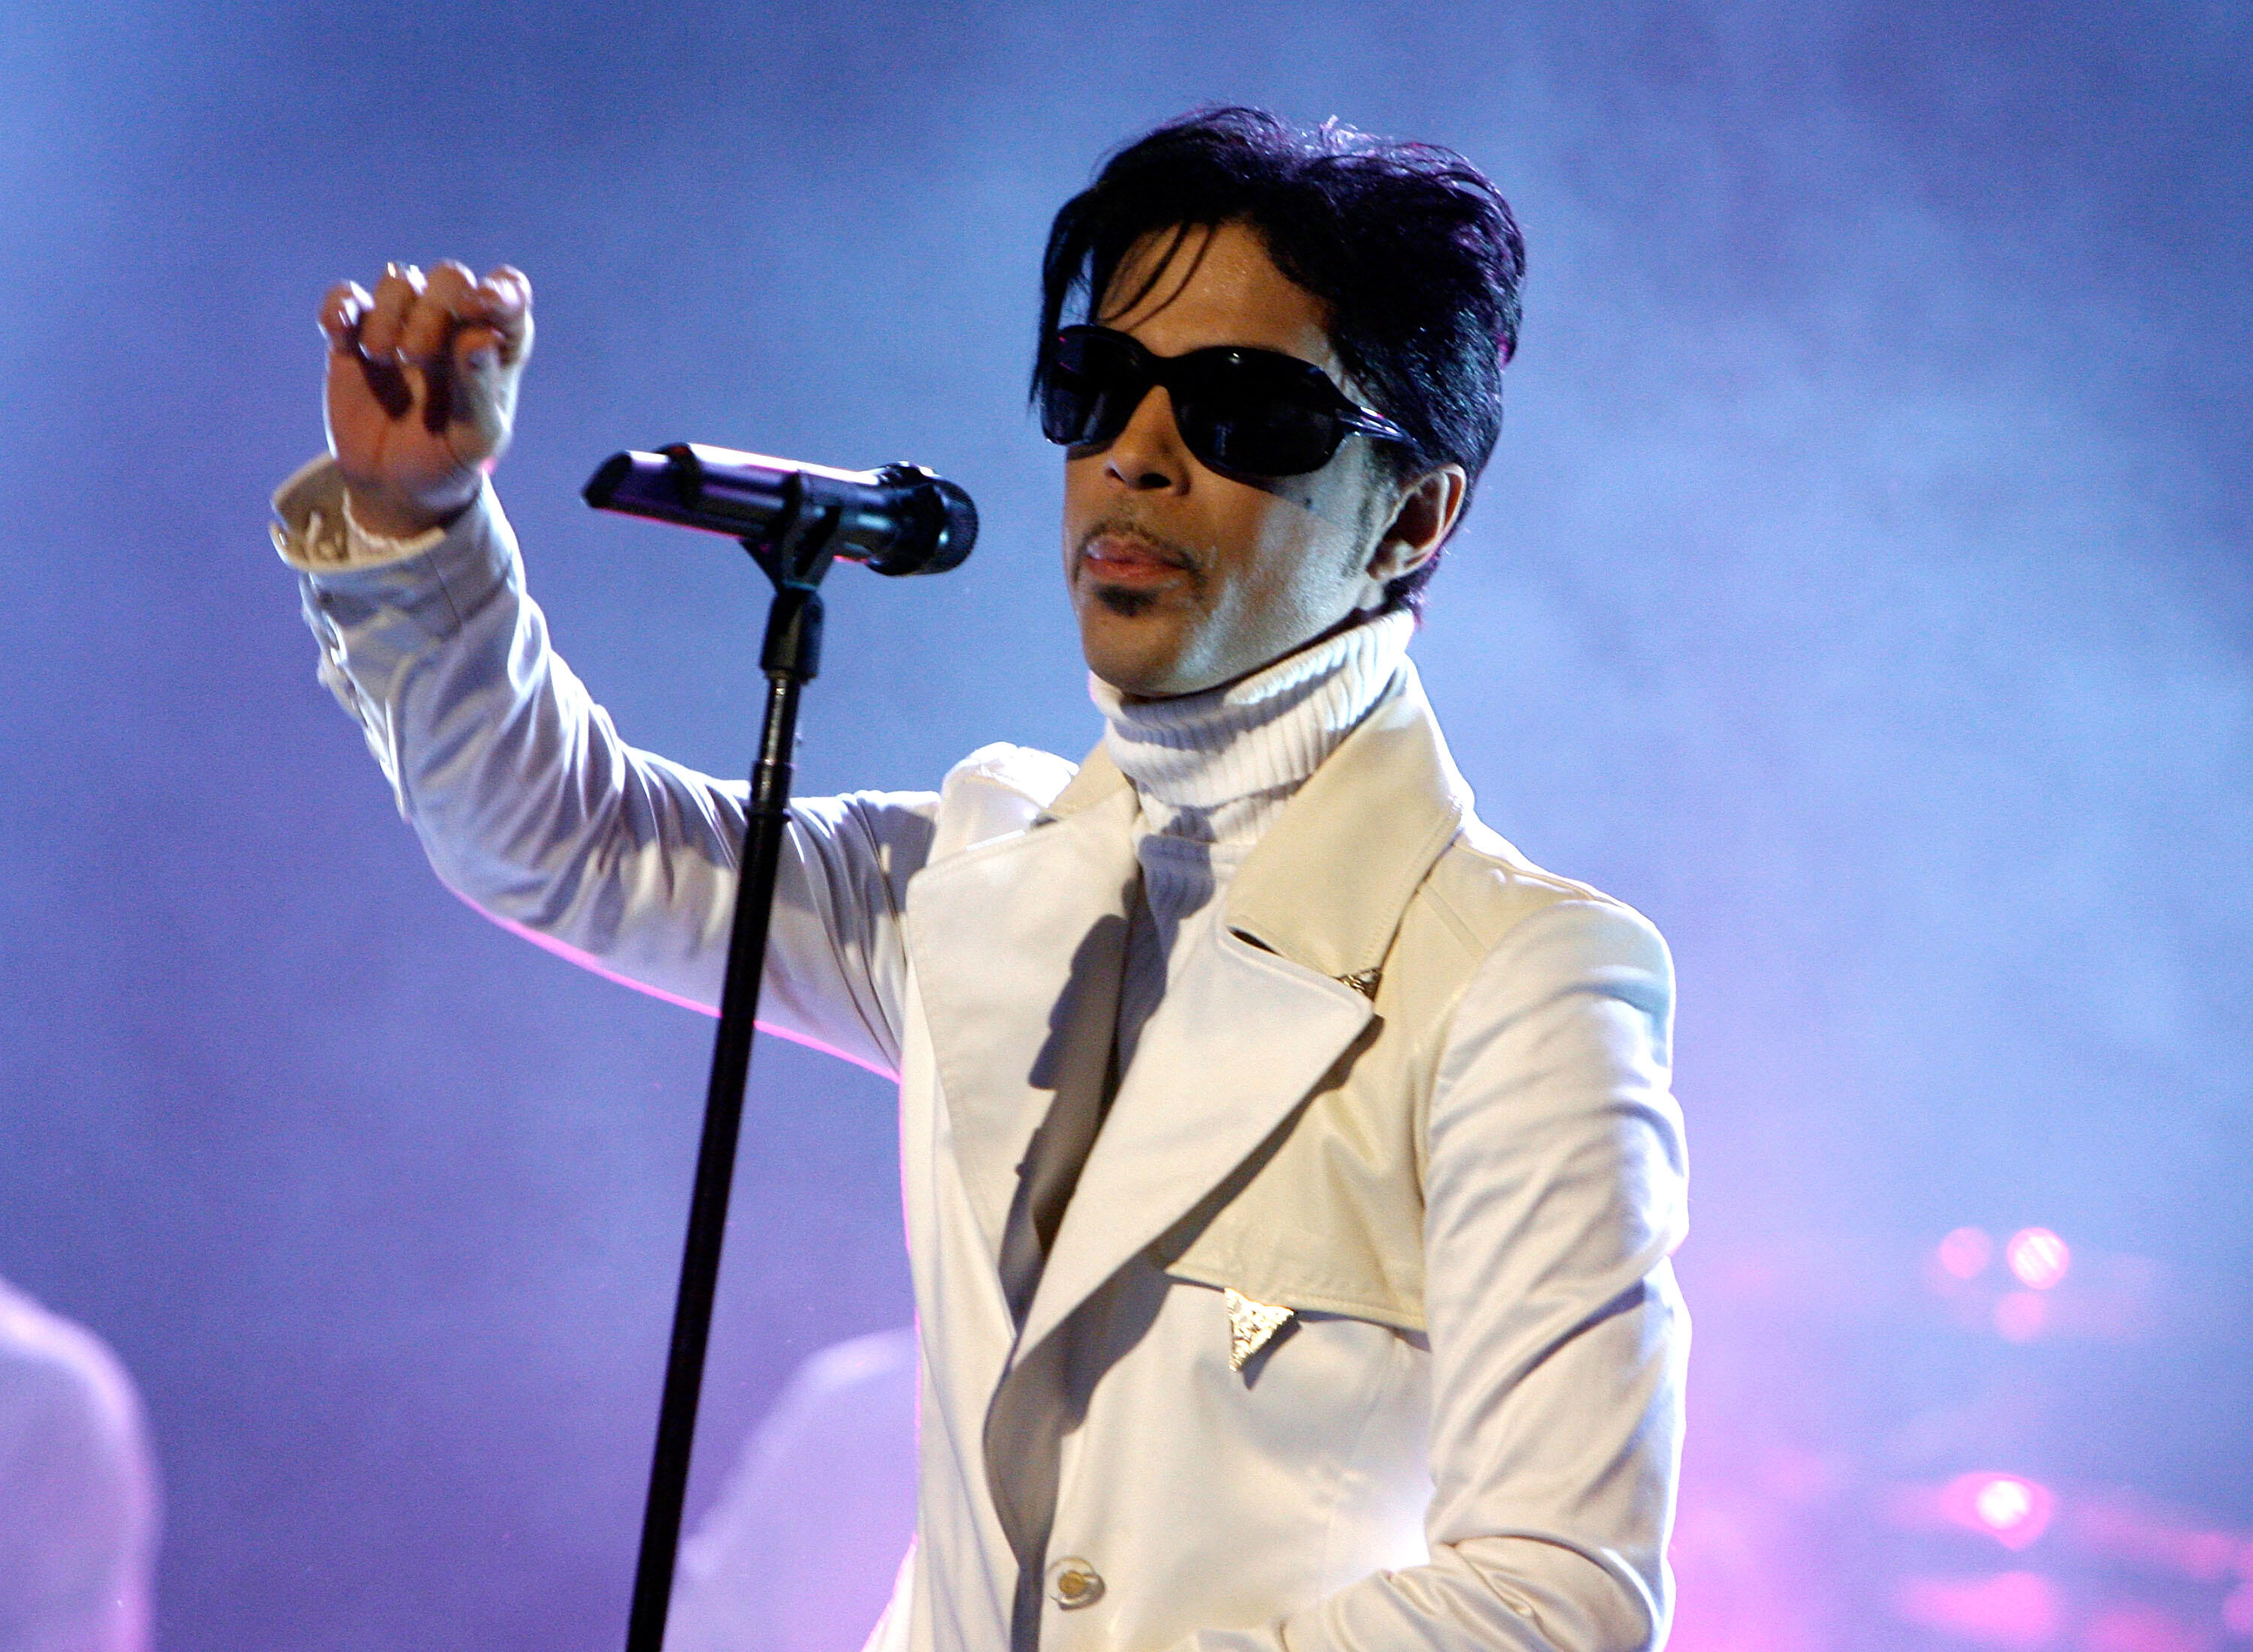 PASADENA, CA - JUNE 01:  Singer Prince performs onstage during the 2007 NCLR ALMA Awards held at the Pasadena Civic Auditorium on June 1, 2007 in Pasadena, California.  (Photo by Kevin Winter/Getty Images for NCLR)